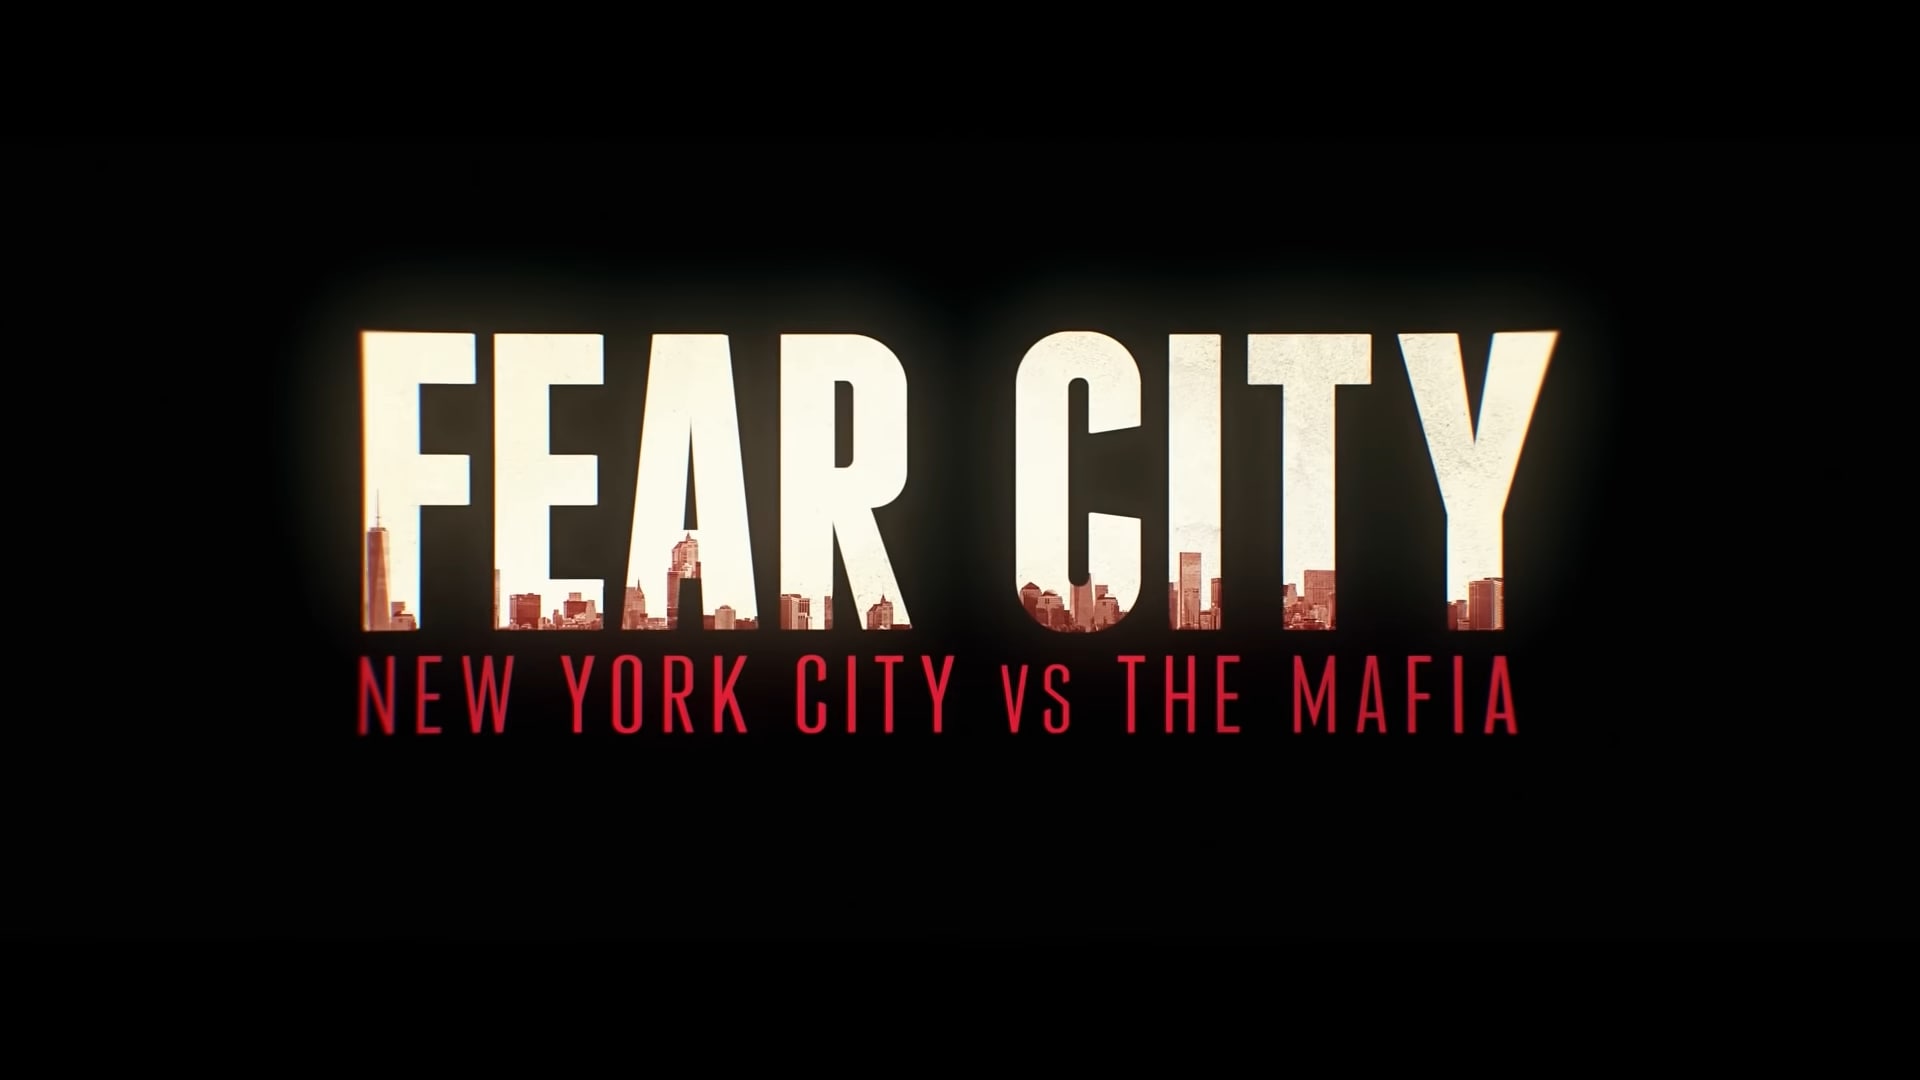 Netflix Fear City New York vs The Mafia Trailer, Netflix Documentaries, Netflix Crime Documentary, Coming to Netflix in July 2020